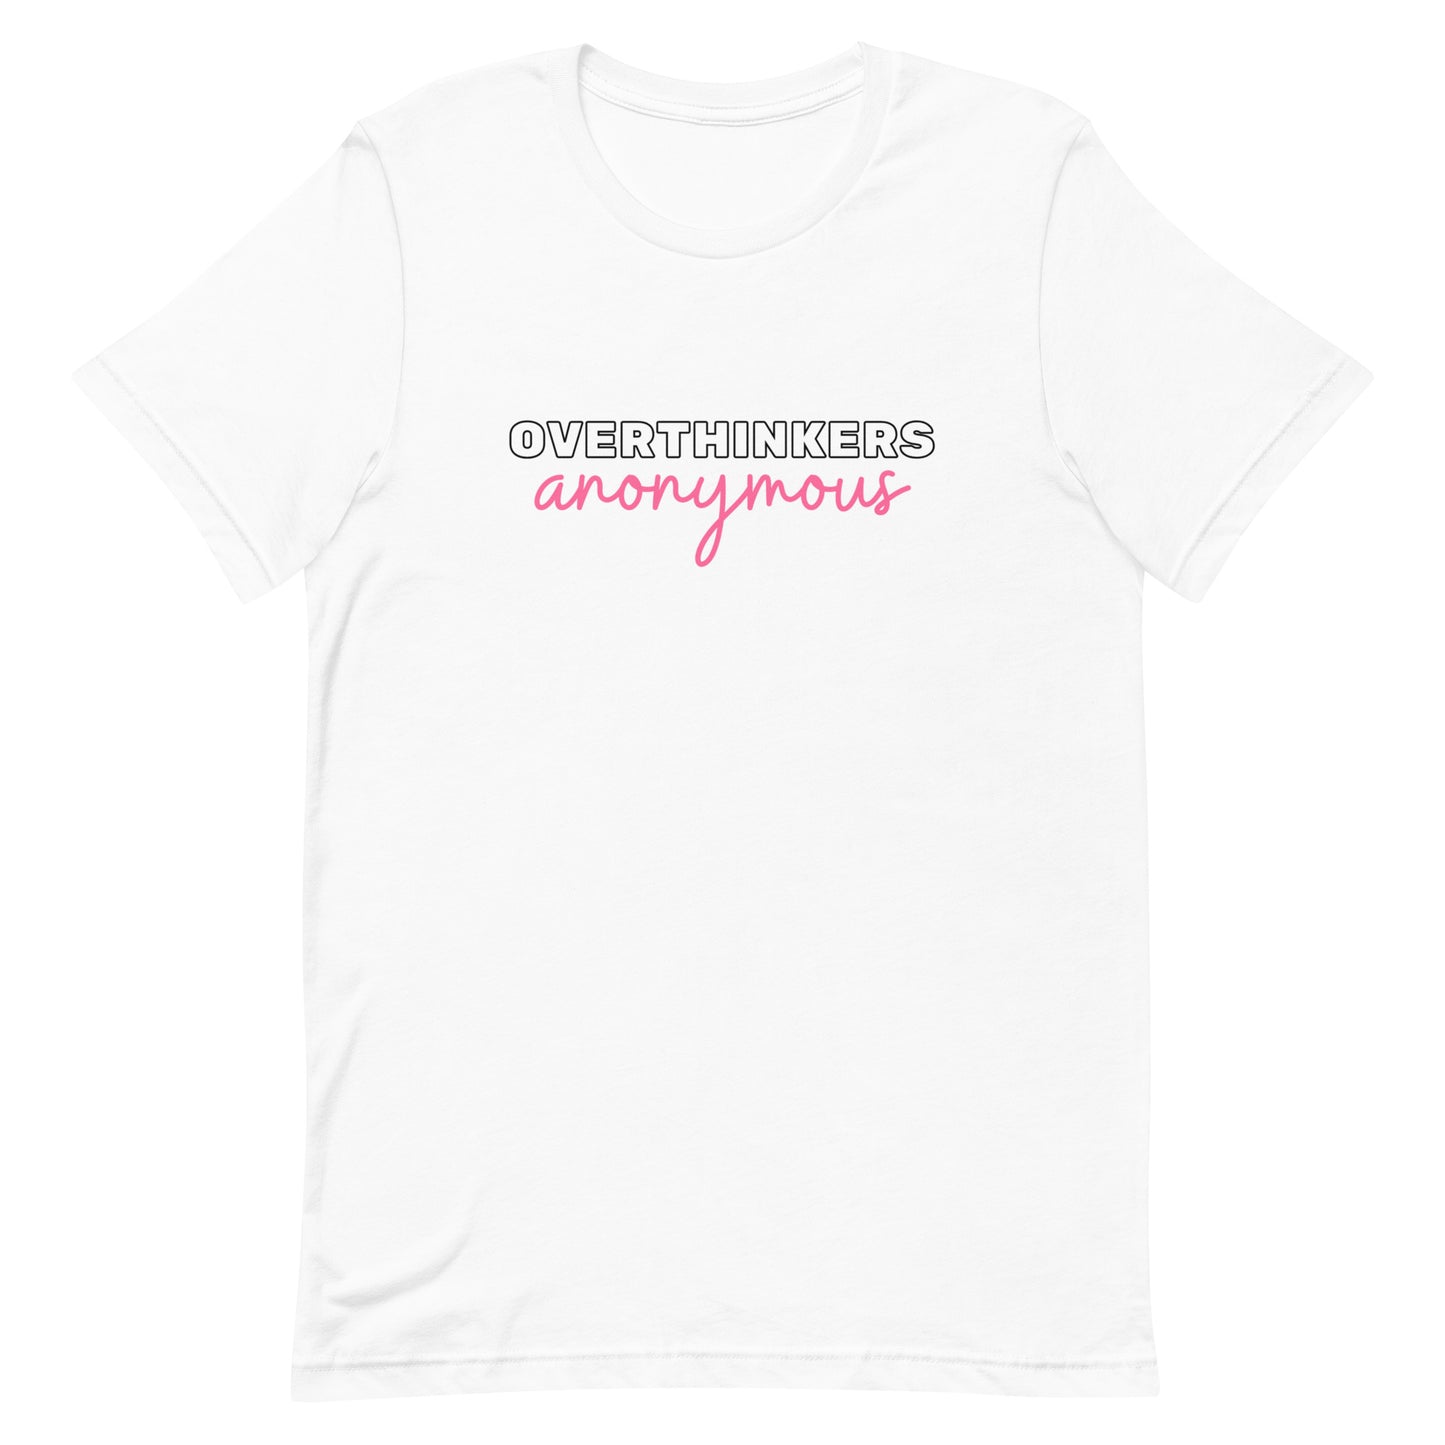 Overthinkers Anonymous Cotton T-shirt